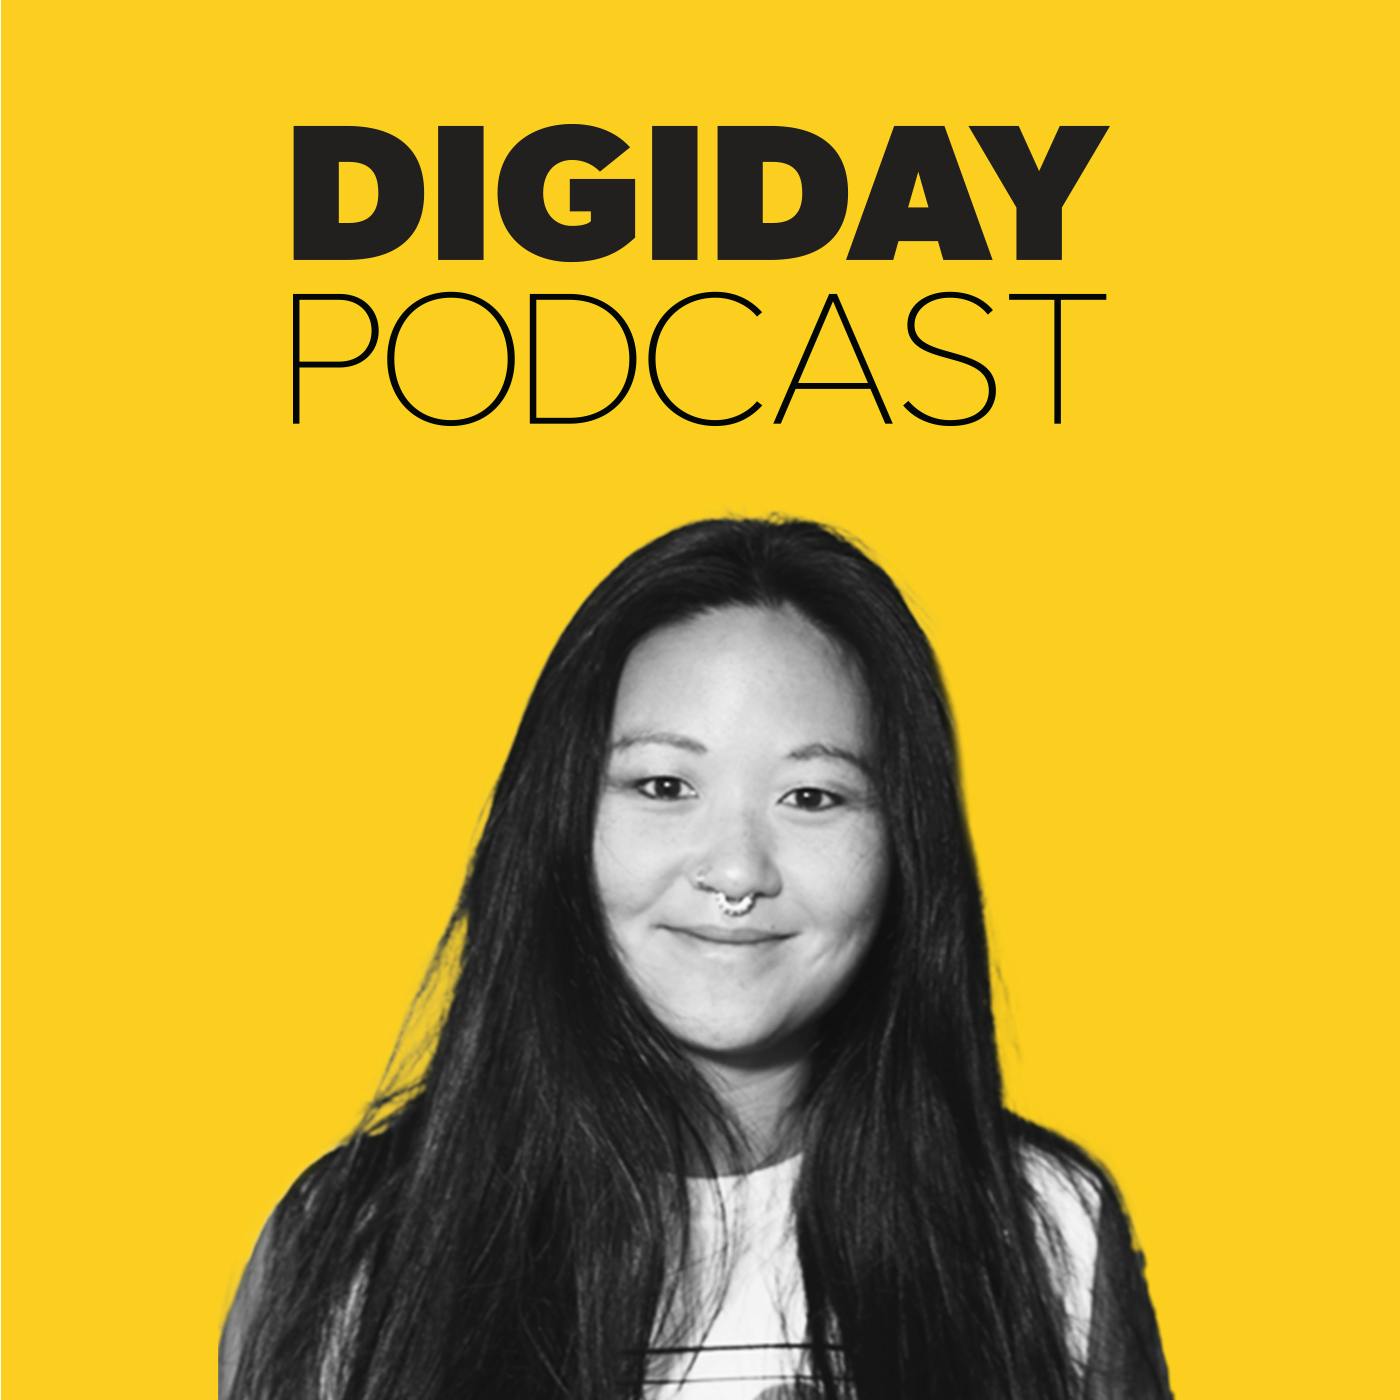 Duolingo's head of global social strategy, Katherine Chan, talks about making unhinged content work and learning from mistakes